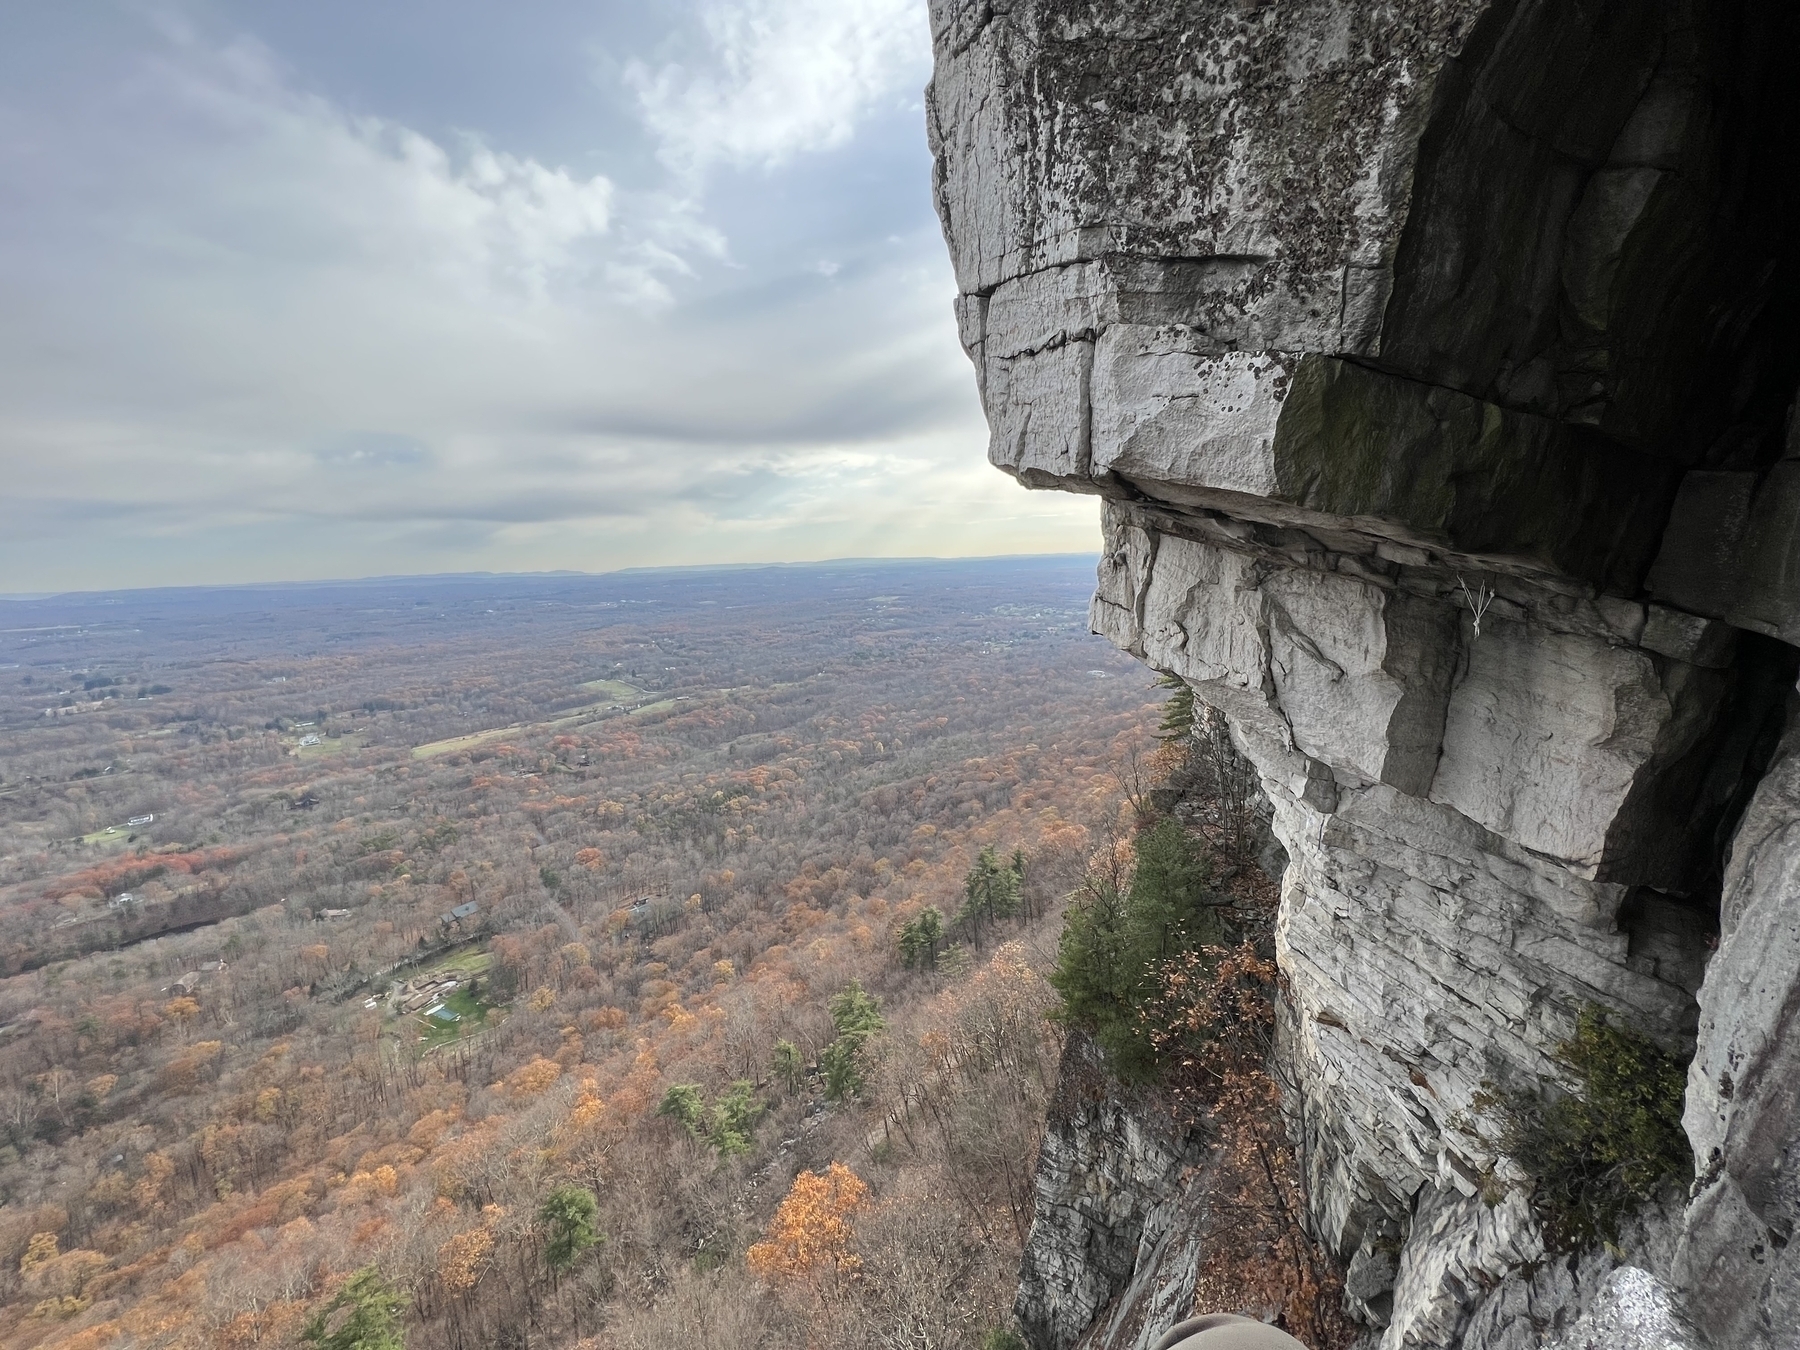 Looking down at the rest of the Gunks cliff where there’s another climber and trees far below in the background.